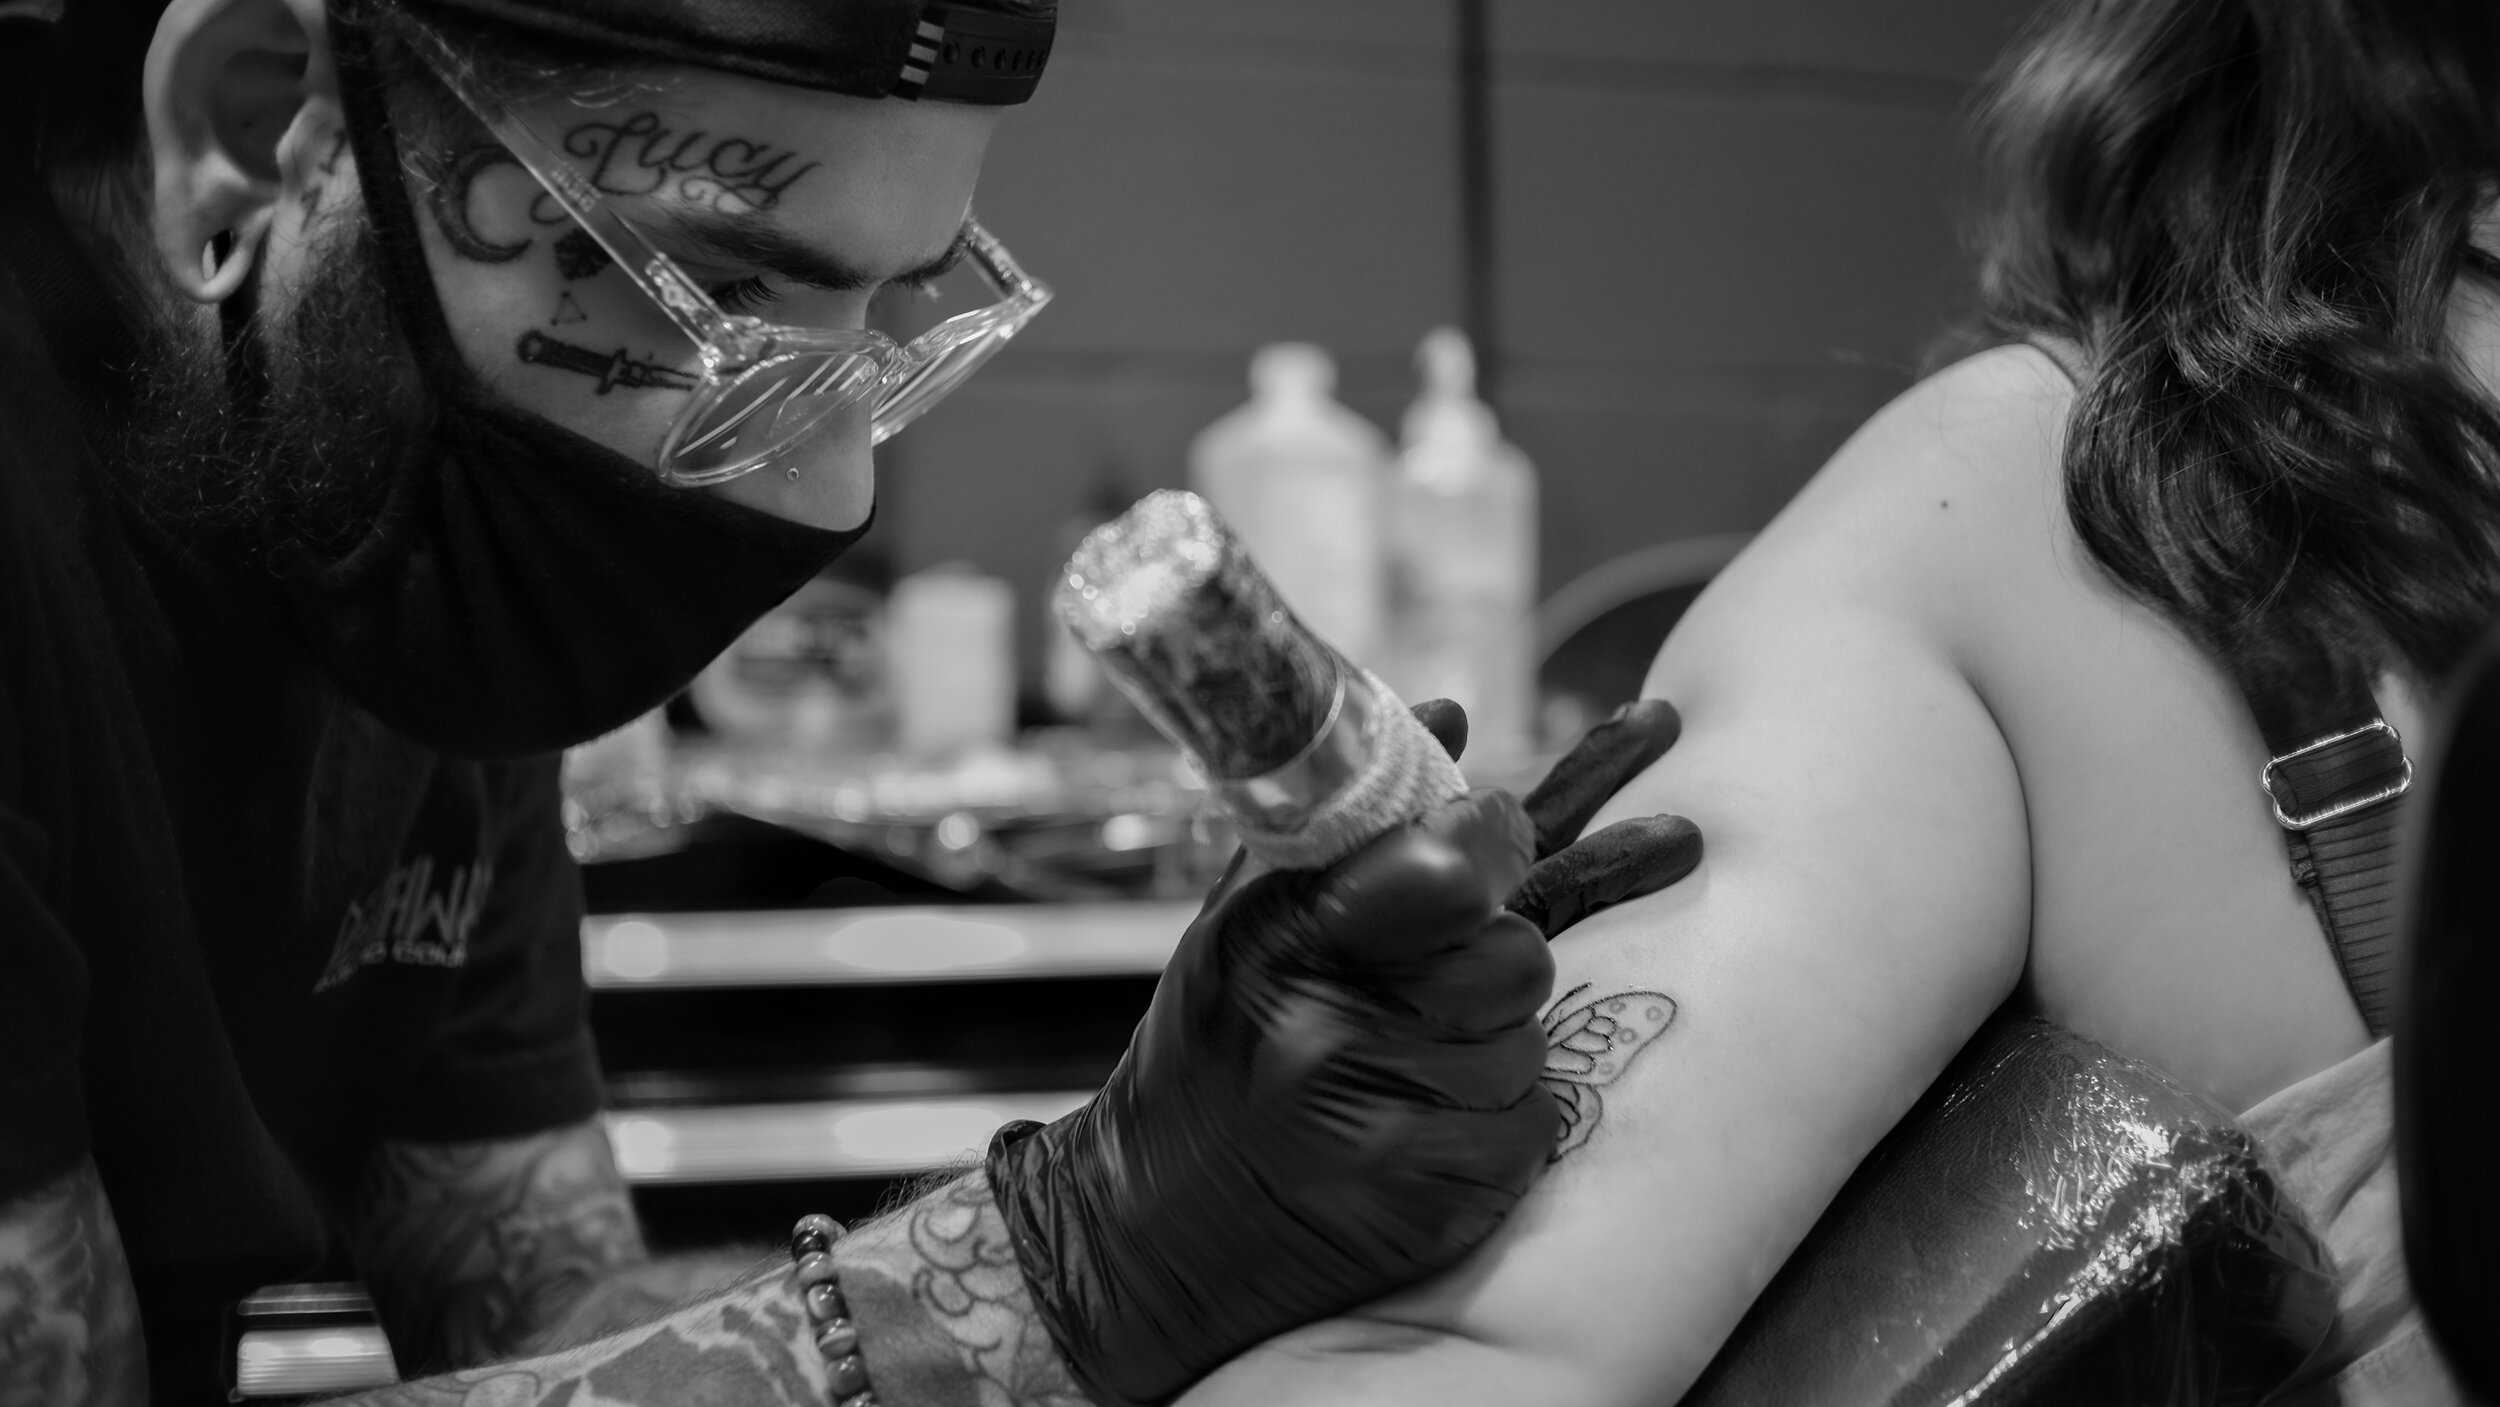 Tattoos - Walk In & Same Day Tattoos | Live By The Sword Tattoo